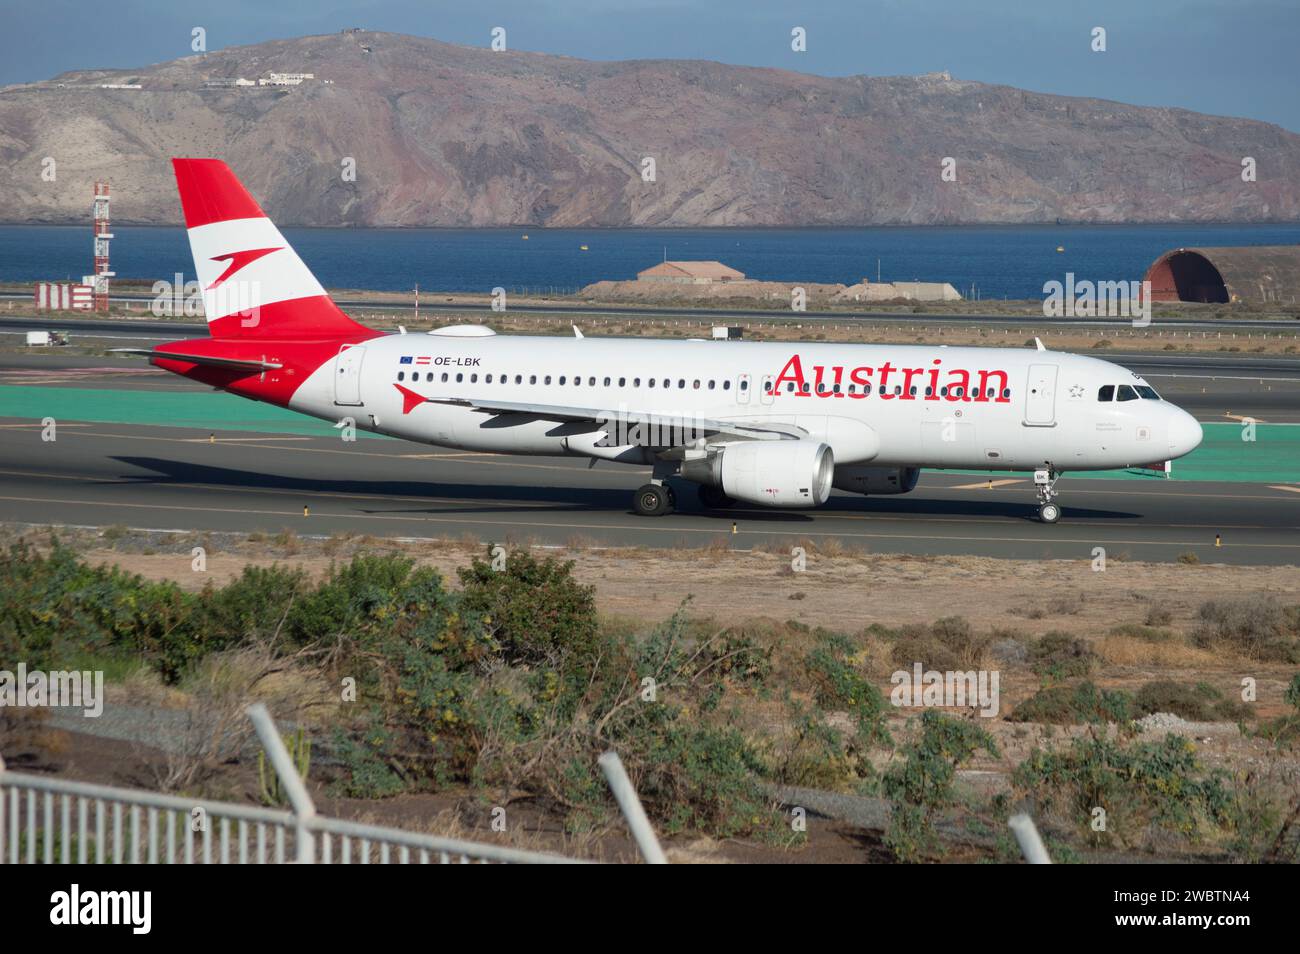 Austrian Airlines Airbus A320 airliner taxiing Stock Photo